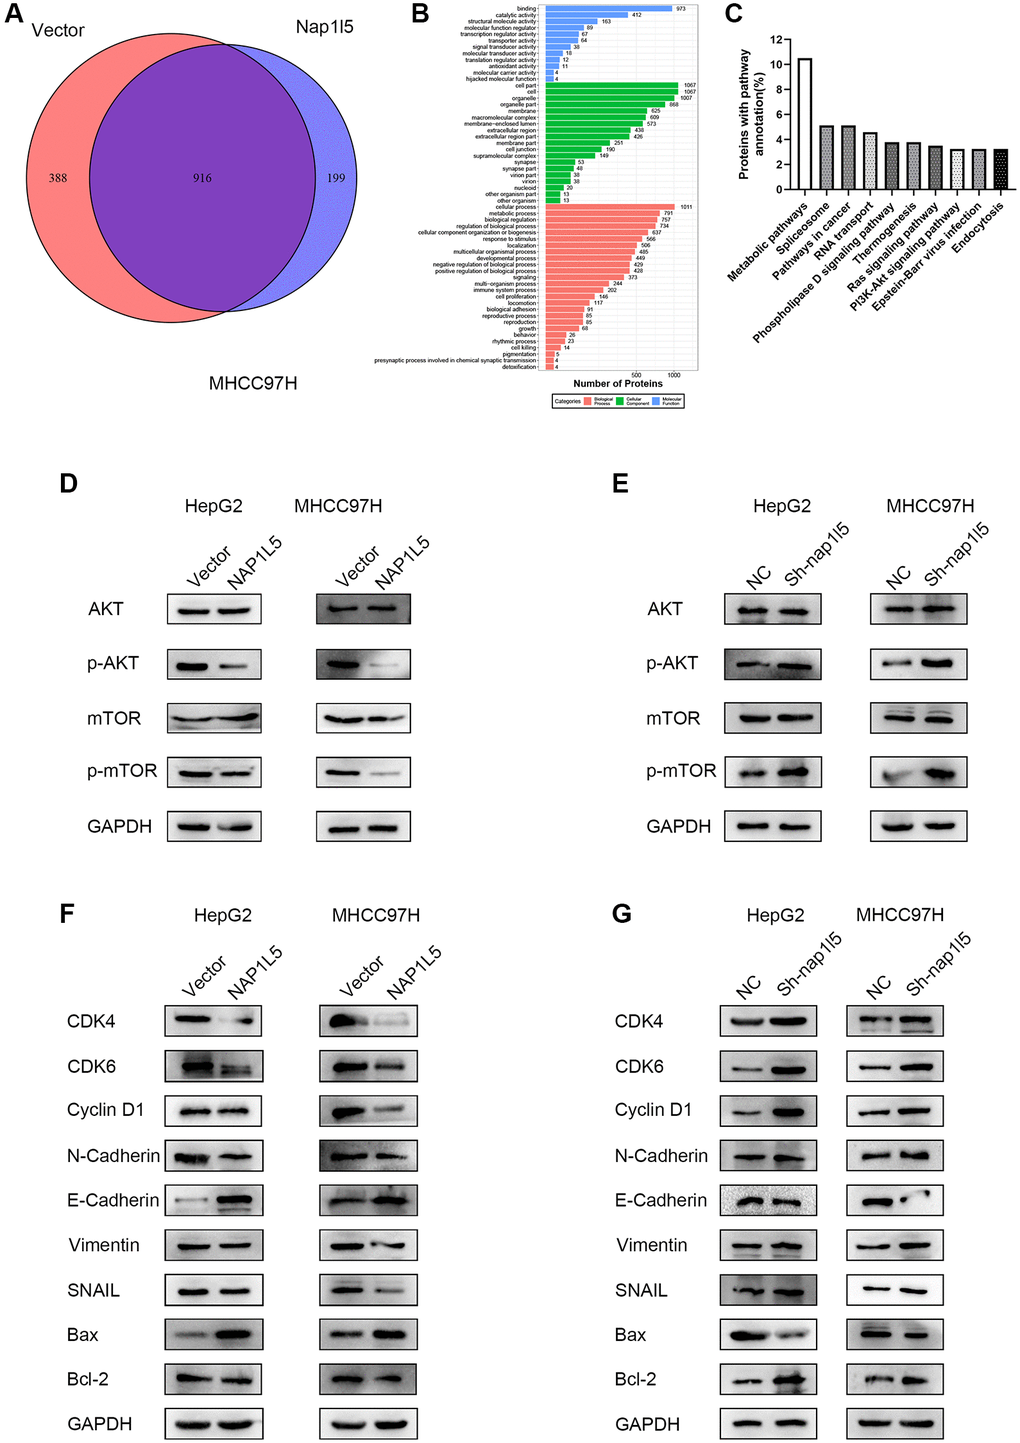 NAP1L5 regulates the PI3K/AKT/MTOR signaling pathway in hepatoma cells. (A) Venn diagram of the mass spectrometry analysis of MHCC97H cells overexpressing NAP1L5 and transferred into the control vector. (B) Mass spectrometry analysis of the GO functional enrichment map of MHCC97H cells overexpressing NAP1L5. (C) Enrichment of differentially expressed gene pathways in NAP1L5-overexpressing and MHCC97H cells transfected with the control vector. (D) Western blotting was used to detect the expression of p-AKT and p-mTOR in HepG2 and MHCC97H cells overexpressing NAP1L5. (E) Western blotting was used to detect the expression of p-AKT and p-mTOR in HepG2 and MHCC97H cells downregulated by NAP1L5. (F) Western blotting was used to analyze the expression of key molecules involved in cell cycle regulation, EMT and apoptosis in HepG2 and MHCC97H cells overexpressing NAP1L5. (G) Western blotting was used to analyze the expression of key molecules involved in cell cycle regulation, EMT and apoptosis in HepG2 and MHCC97H cells downregulated by NAP1L5.